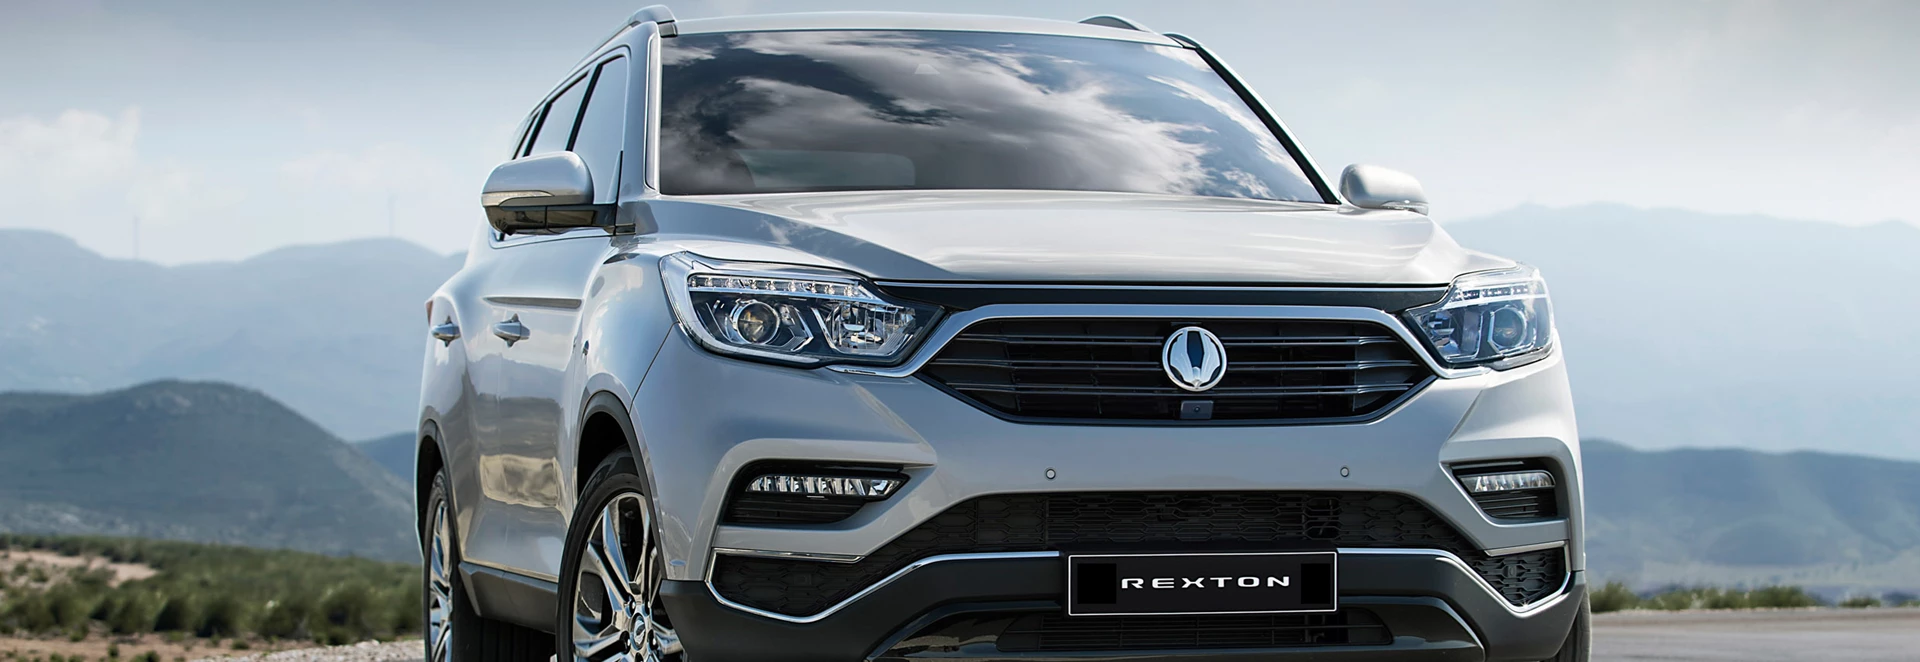 SsangYong to preview new Rexton in Paris 